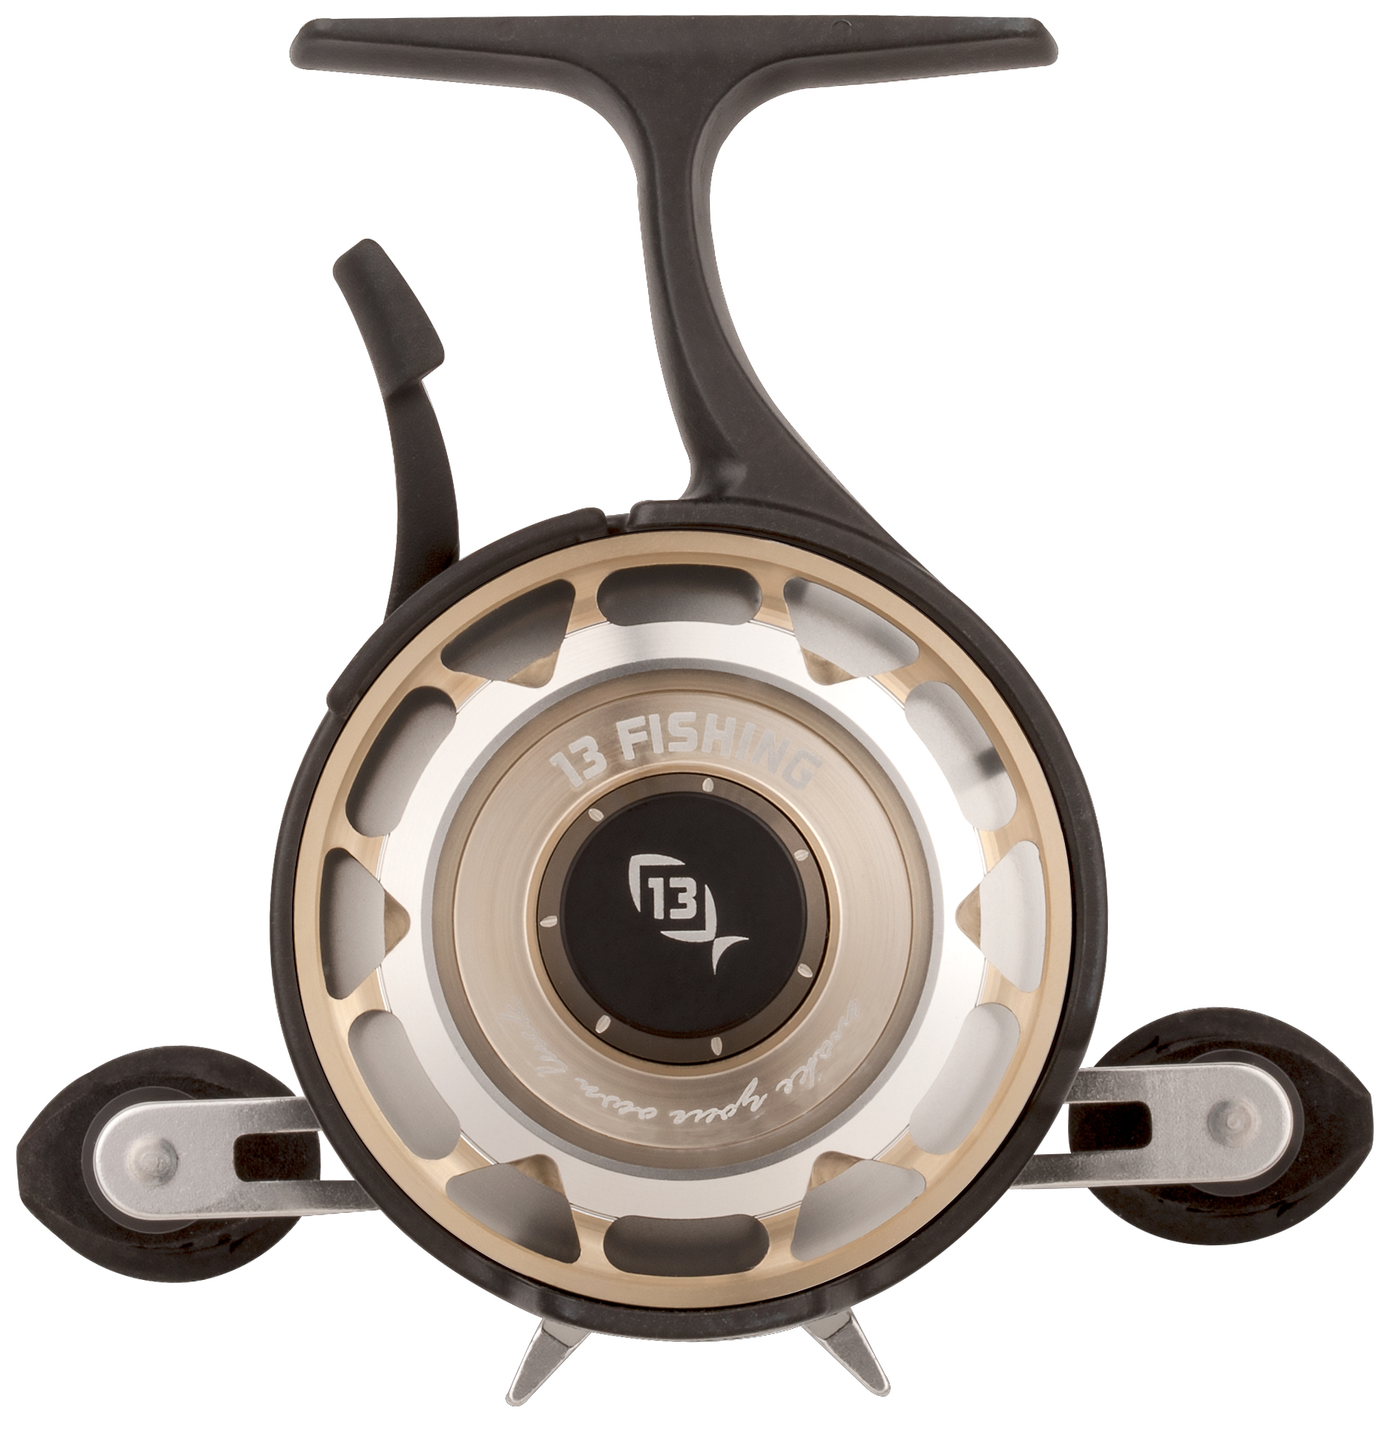 CARBON Ice Fishing Reels 3.2:1 HighSpeed Free Fall Dual-mode